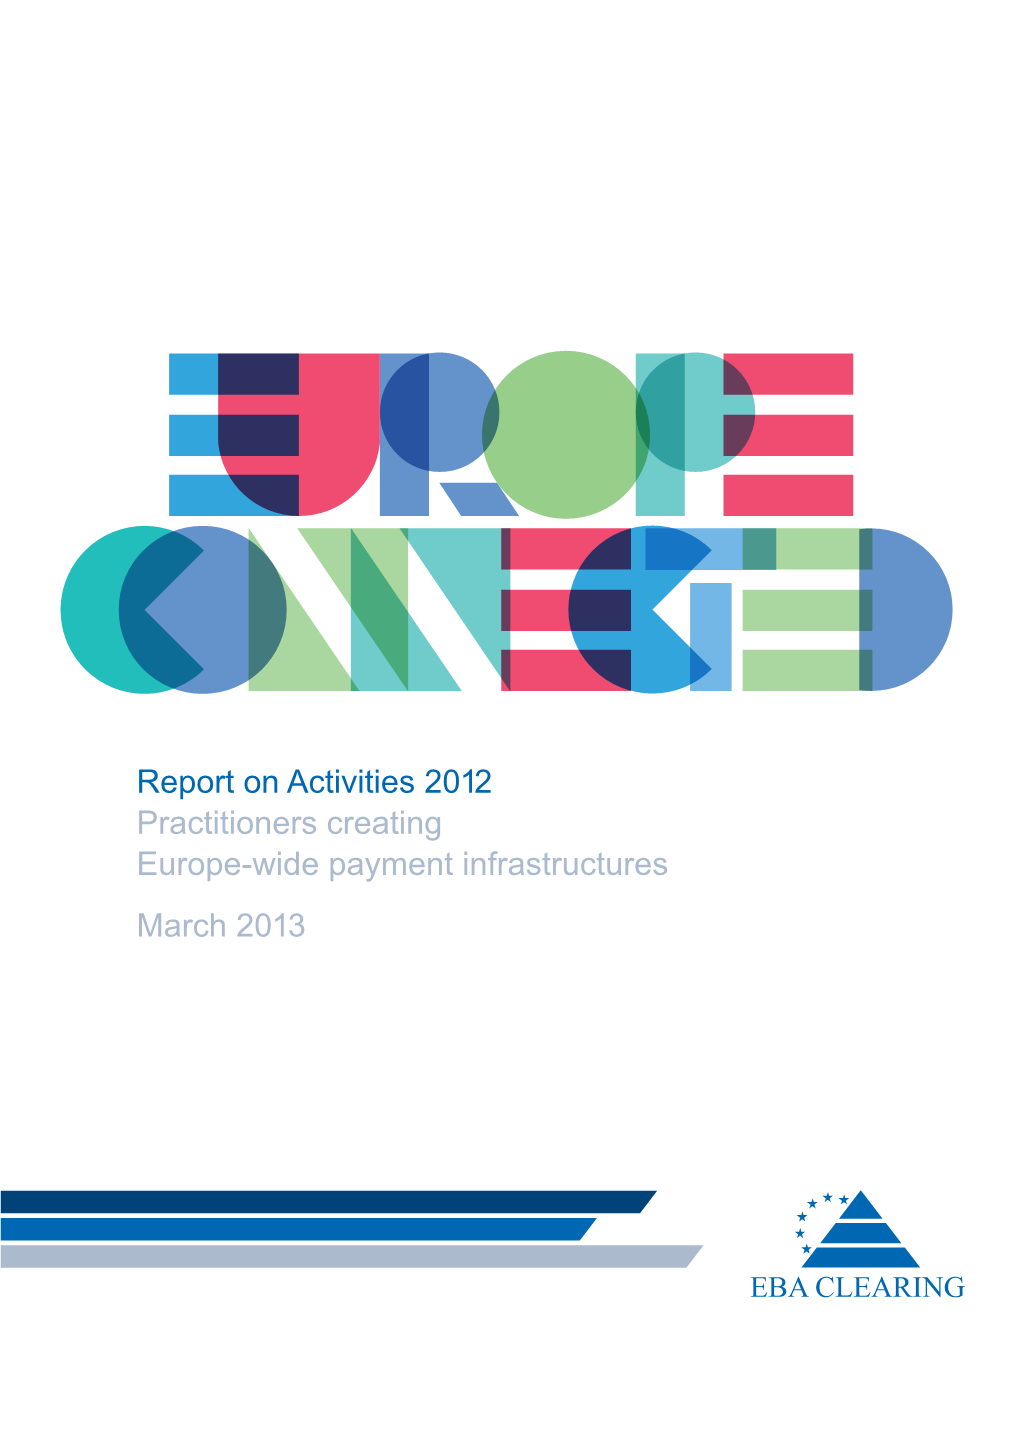 Report on Activities 2012 Practitioners Creating Europe-Wide Payment